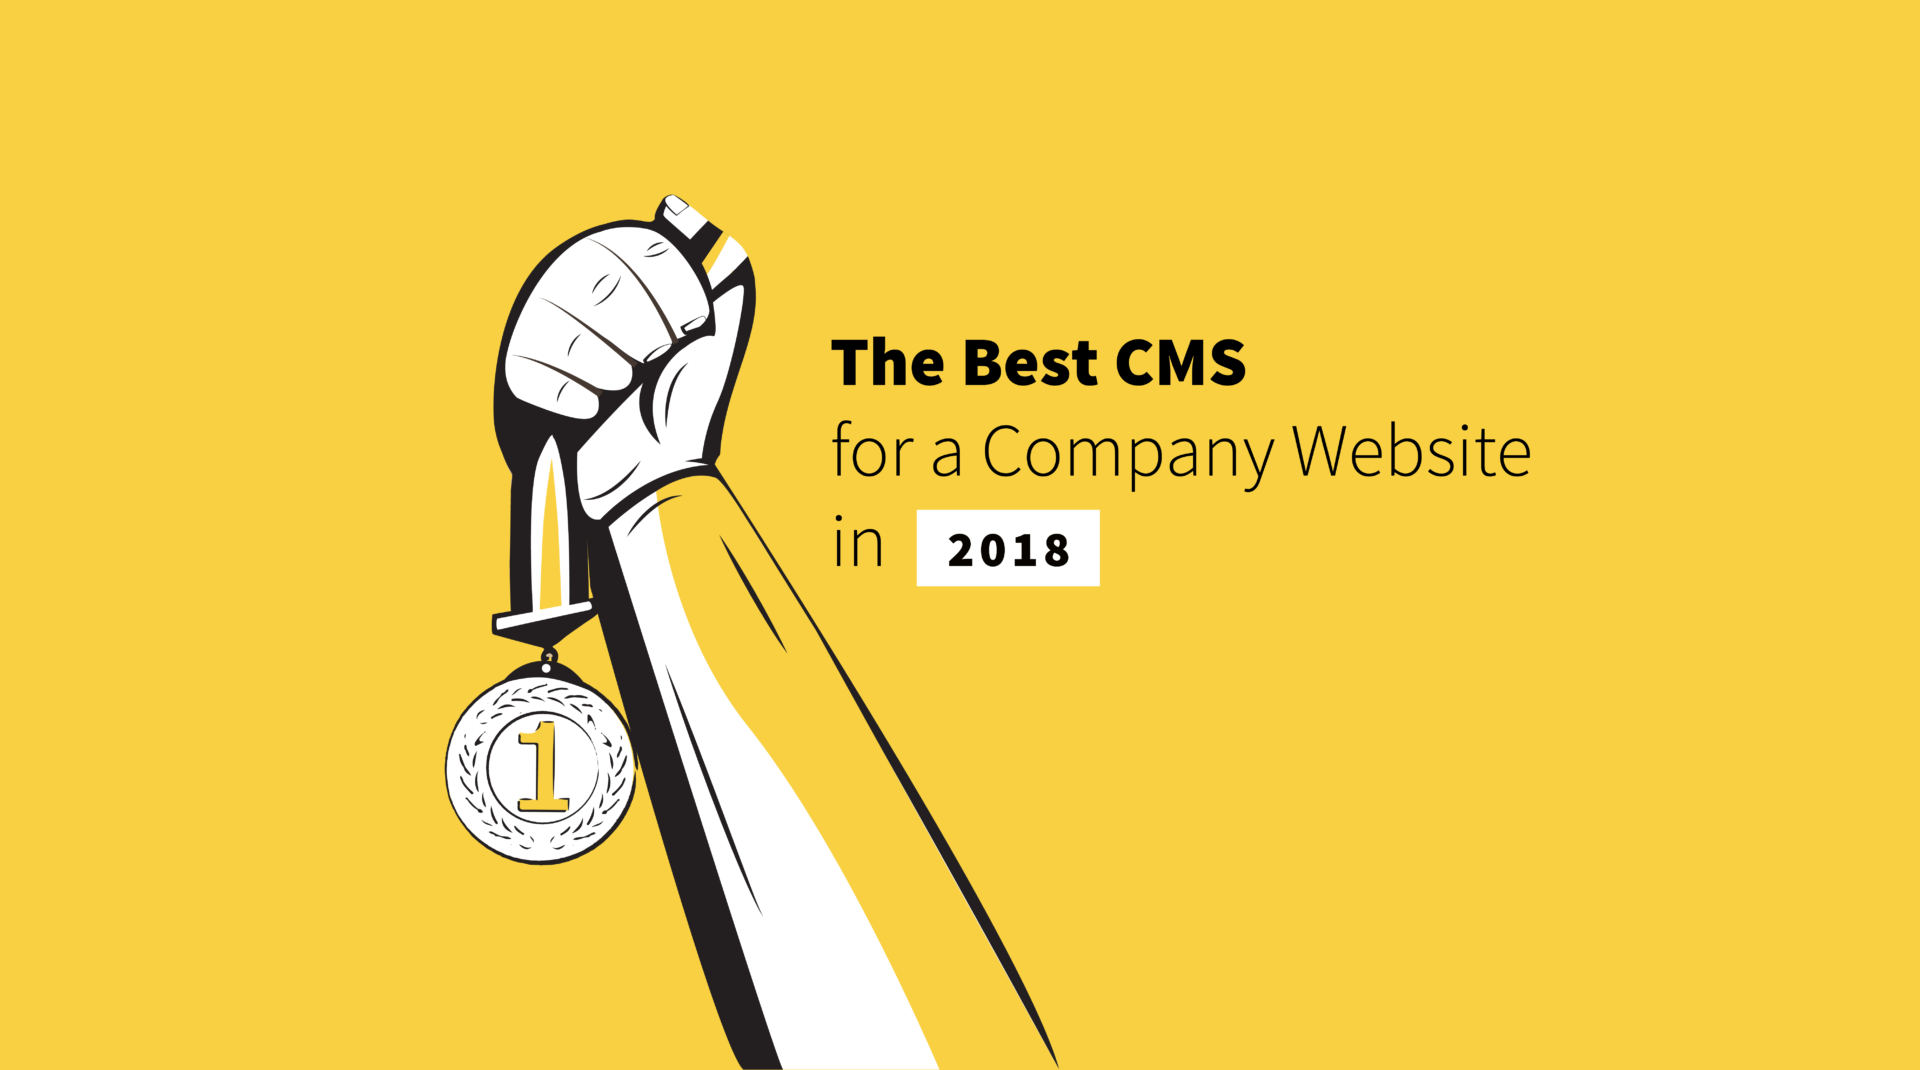 The Best CMS for a Company Website in 2018